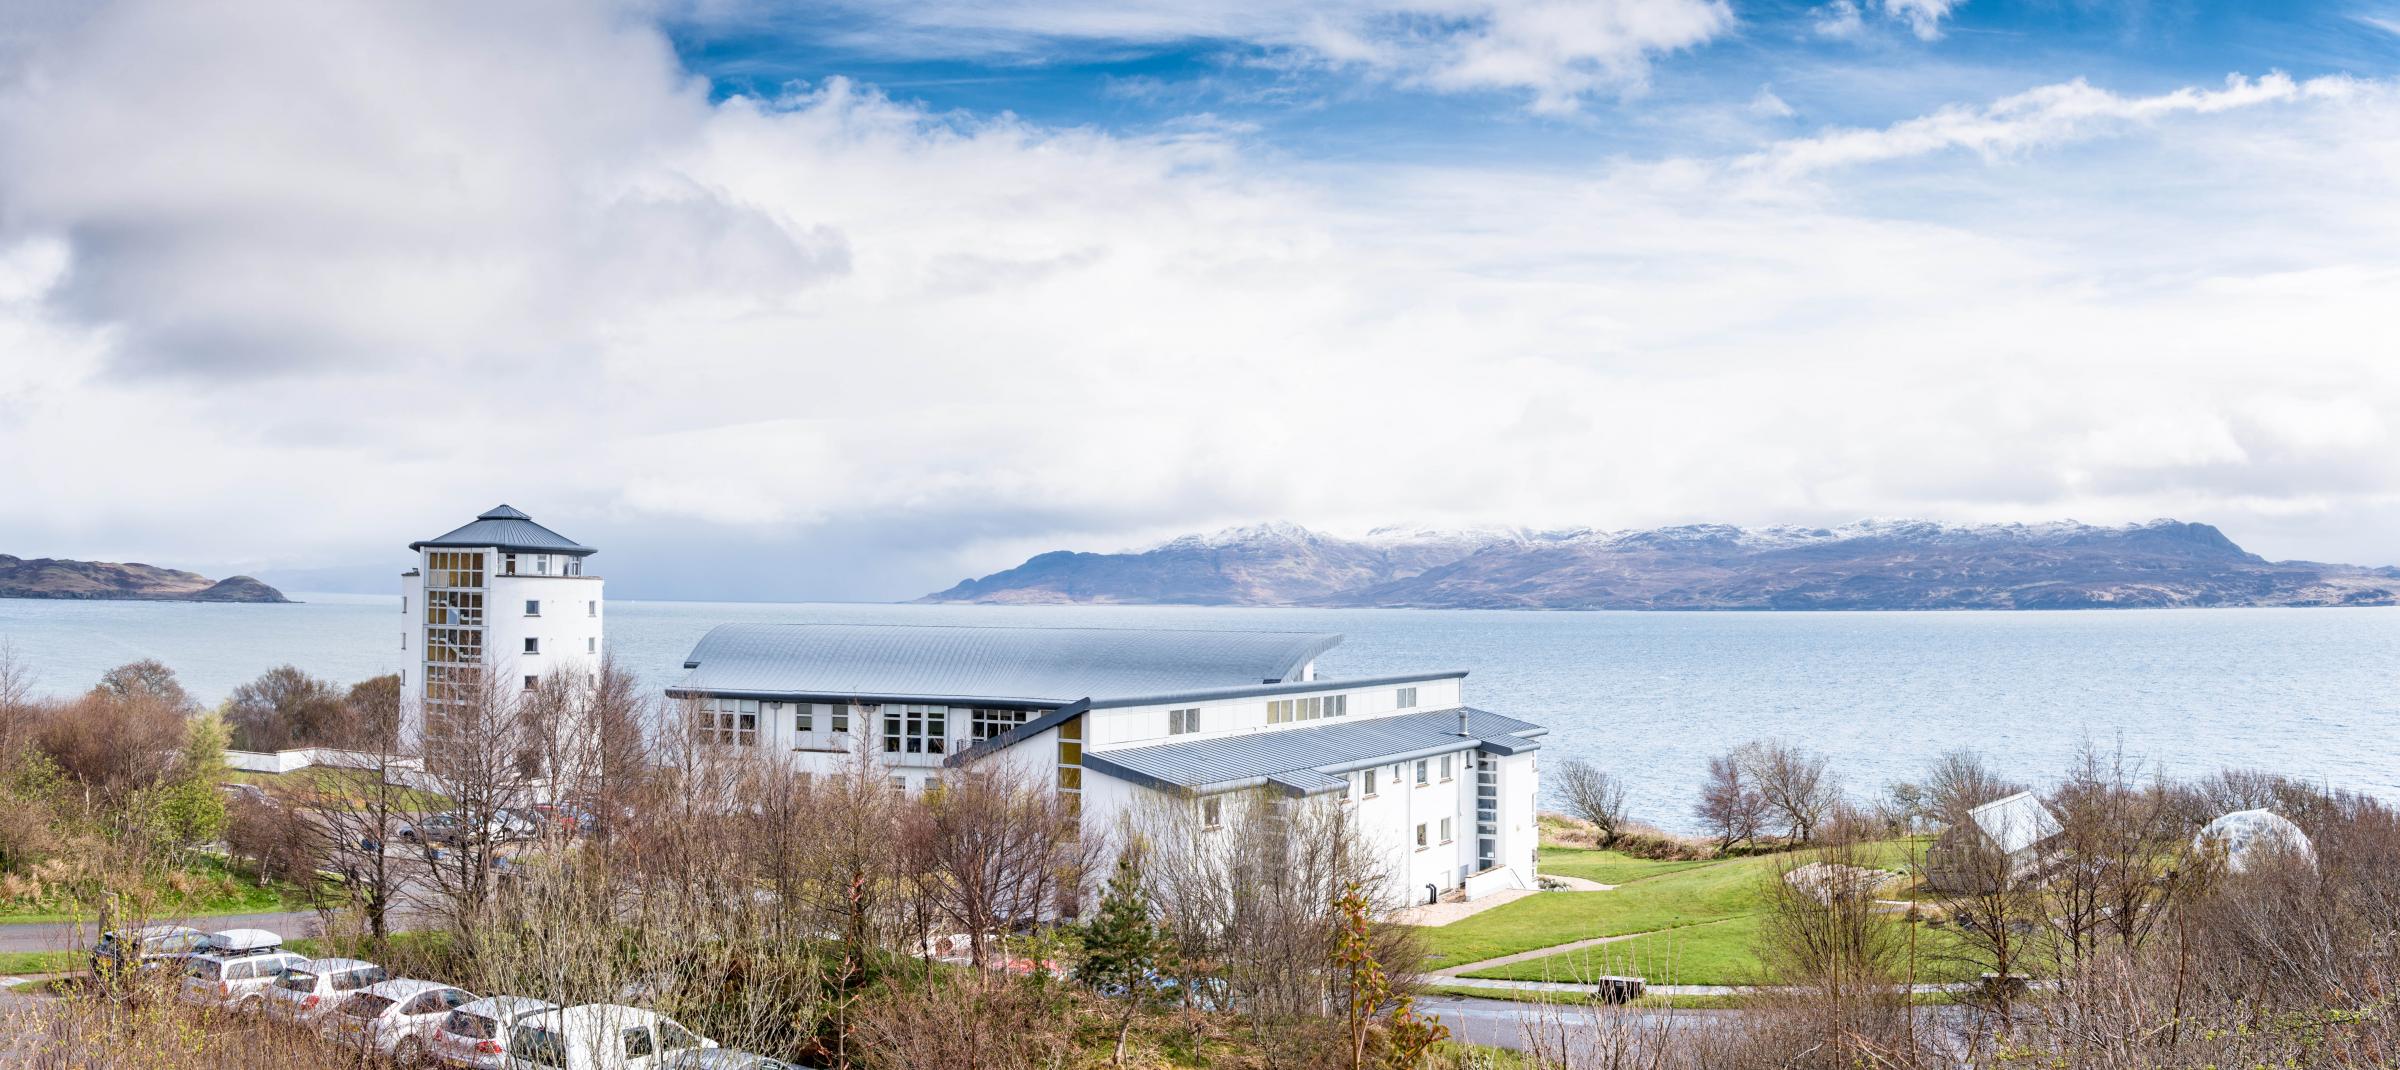 Skye S The Limit At Sabhal Mor Ostaig A Unique Gaelic Only College Set In A Stunning Island Location Heraldscotland